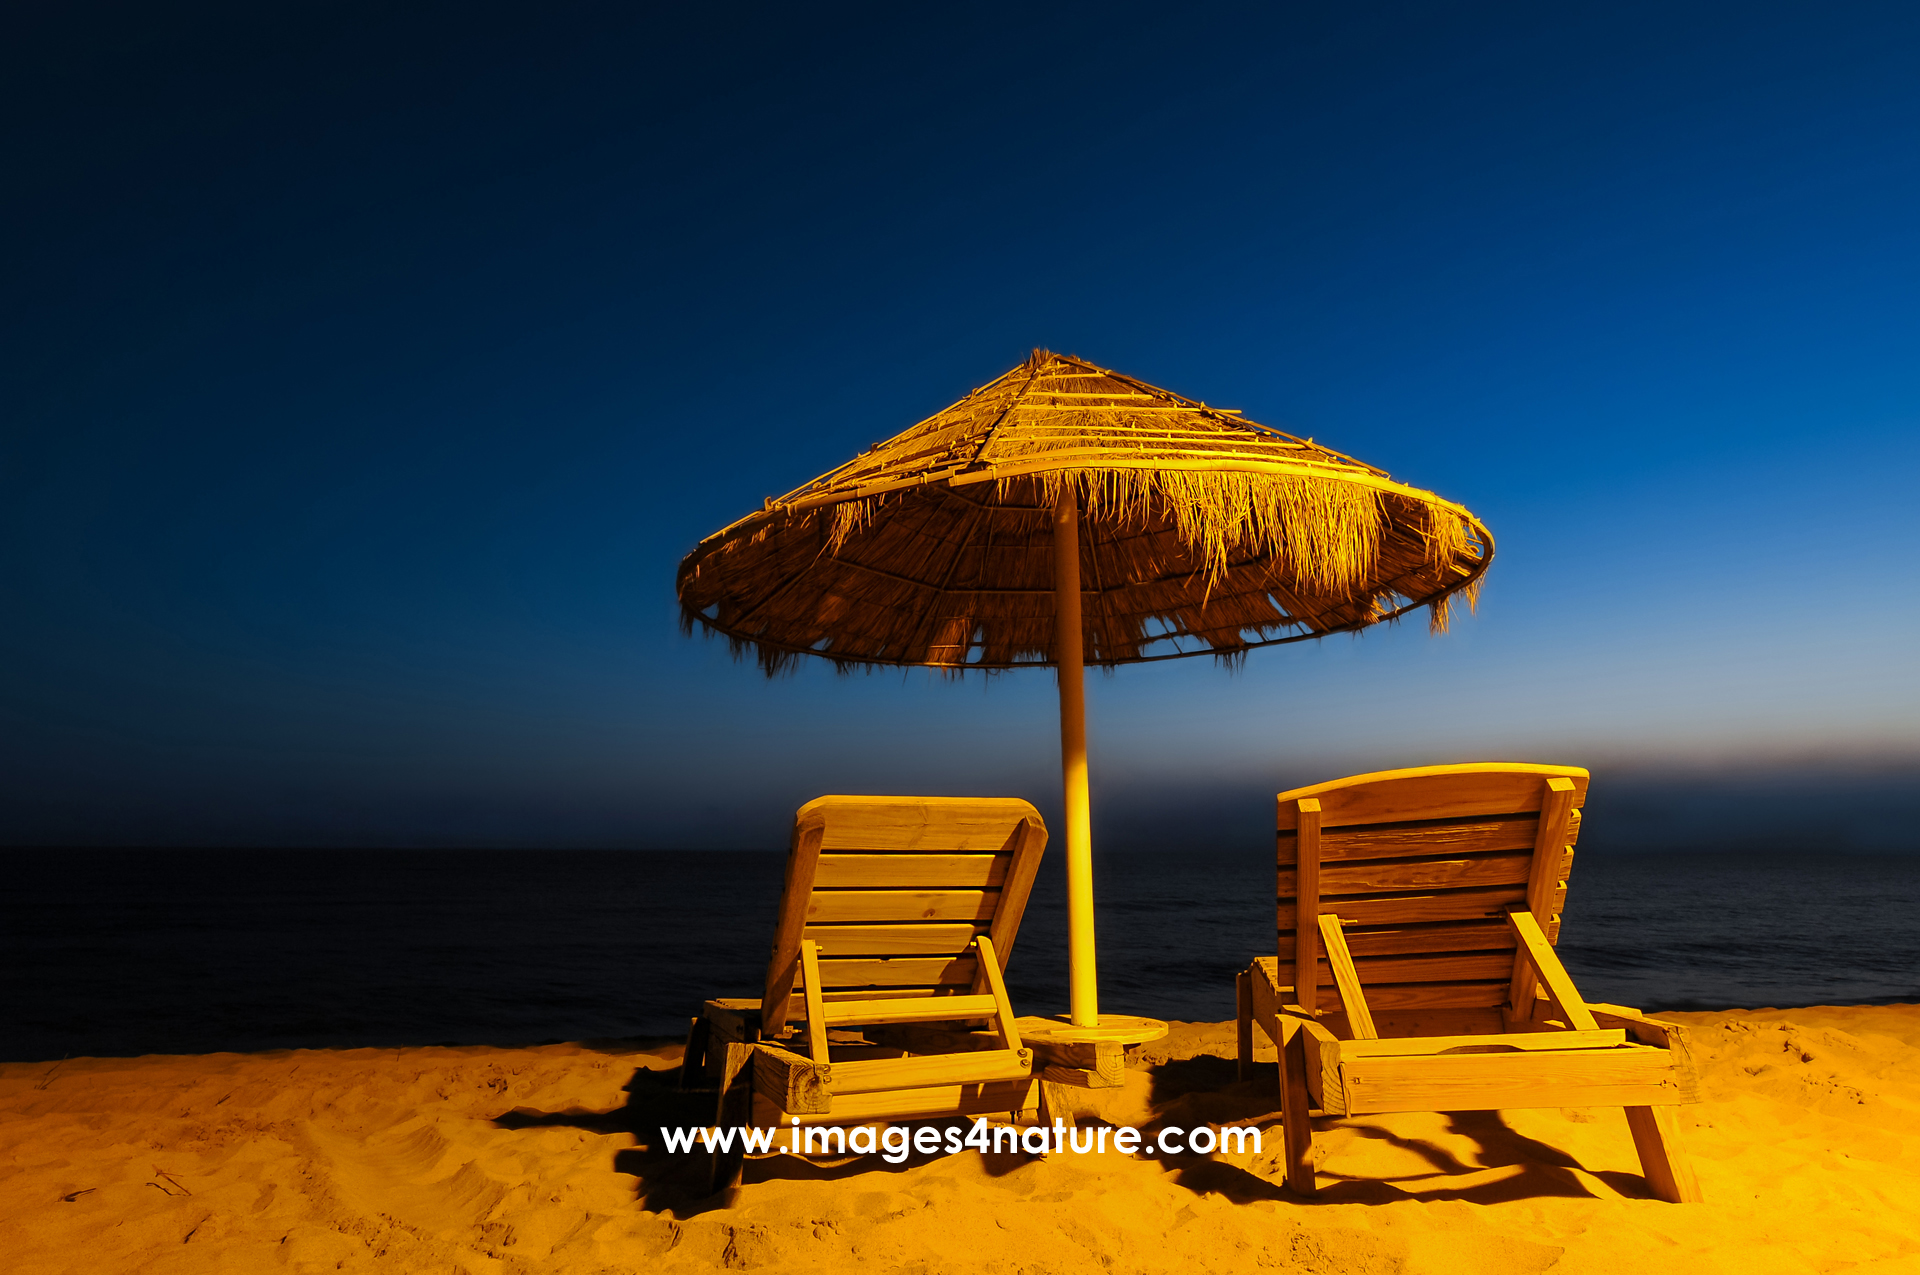 Sunshade and two lounge chairs on a sandy beach during blue hour